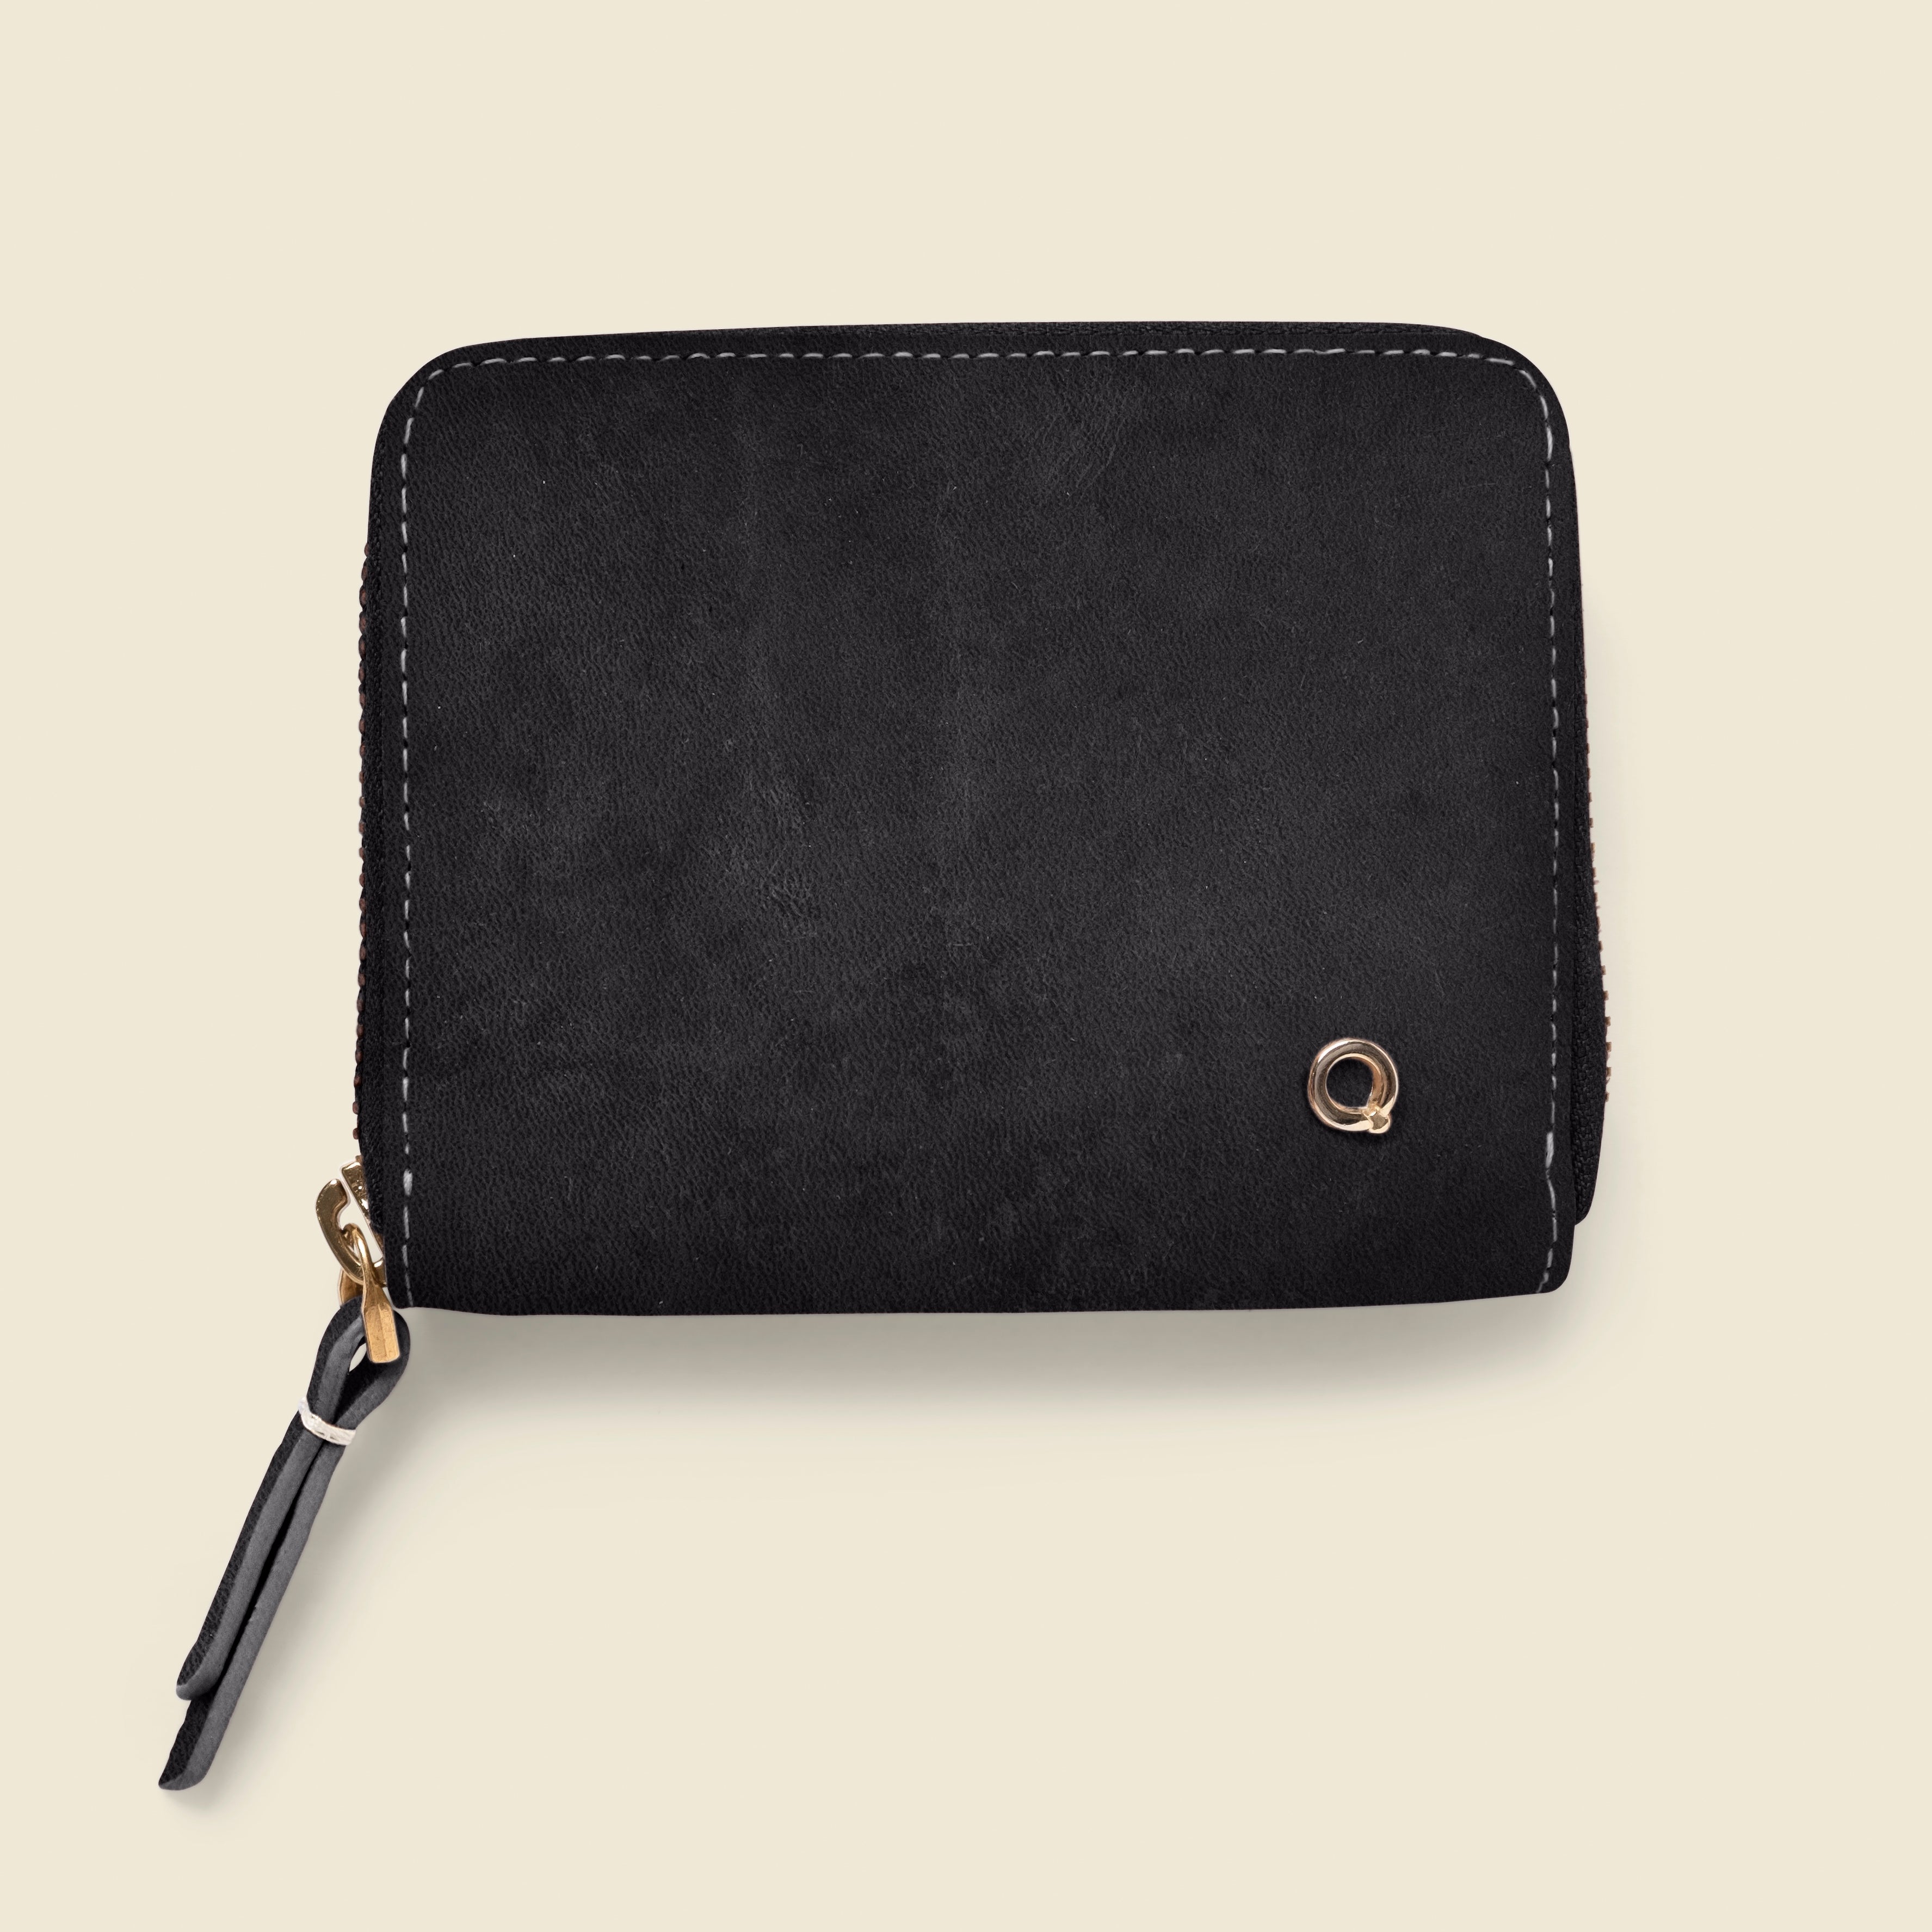 black zipper wallet for women - corporate gifts and private label